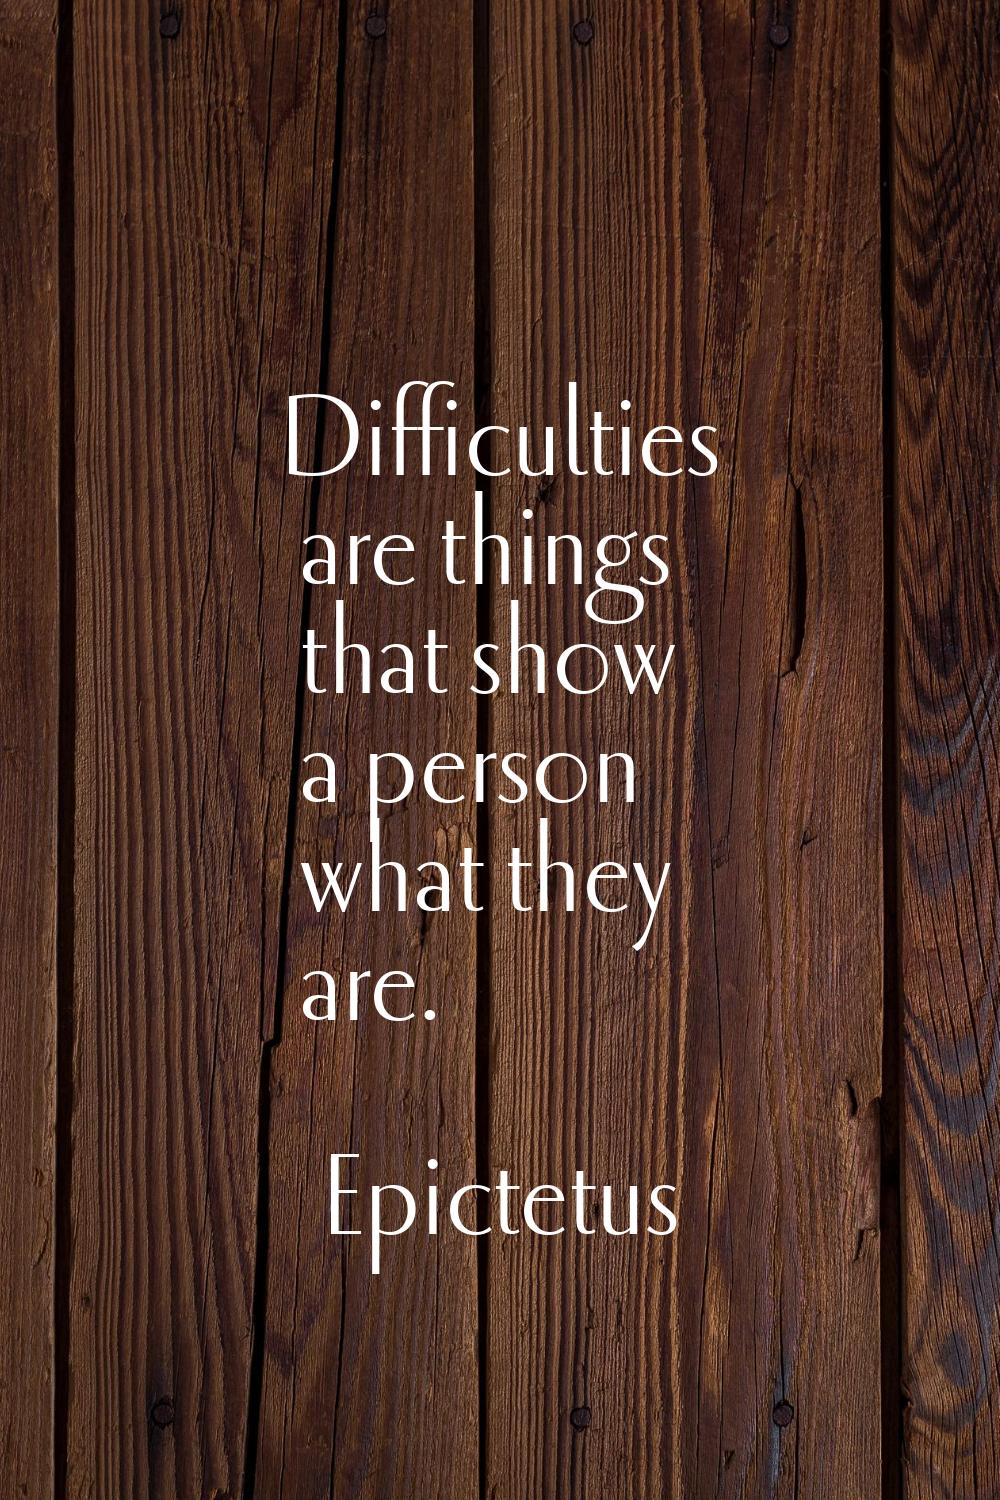 Difficulties are things that show a person what they are.